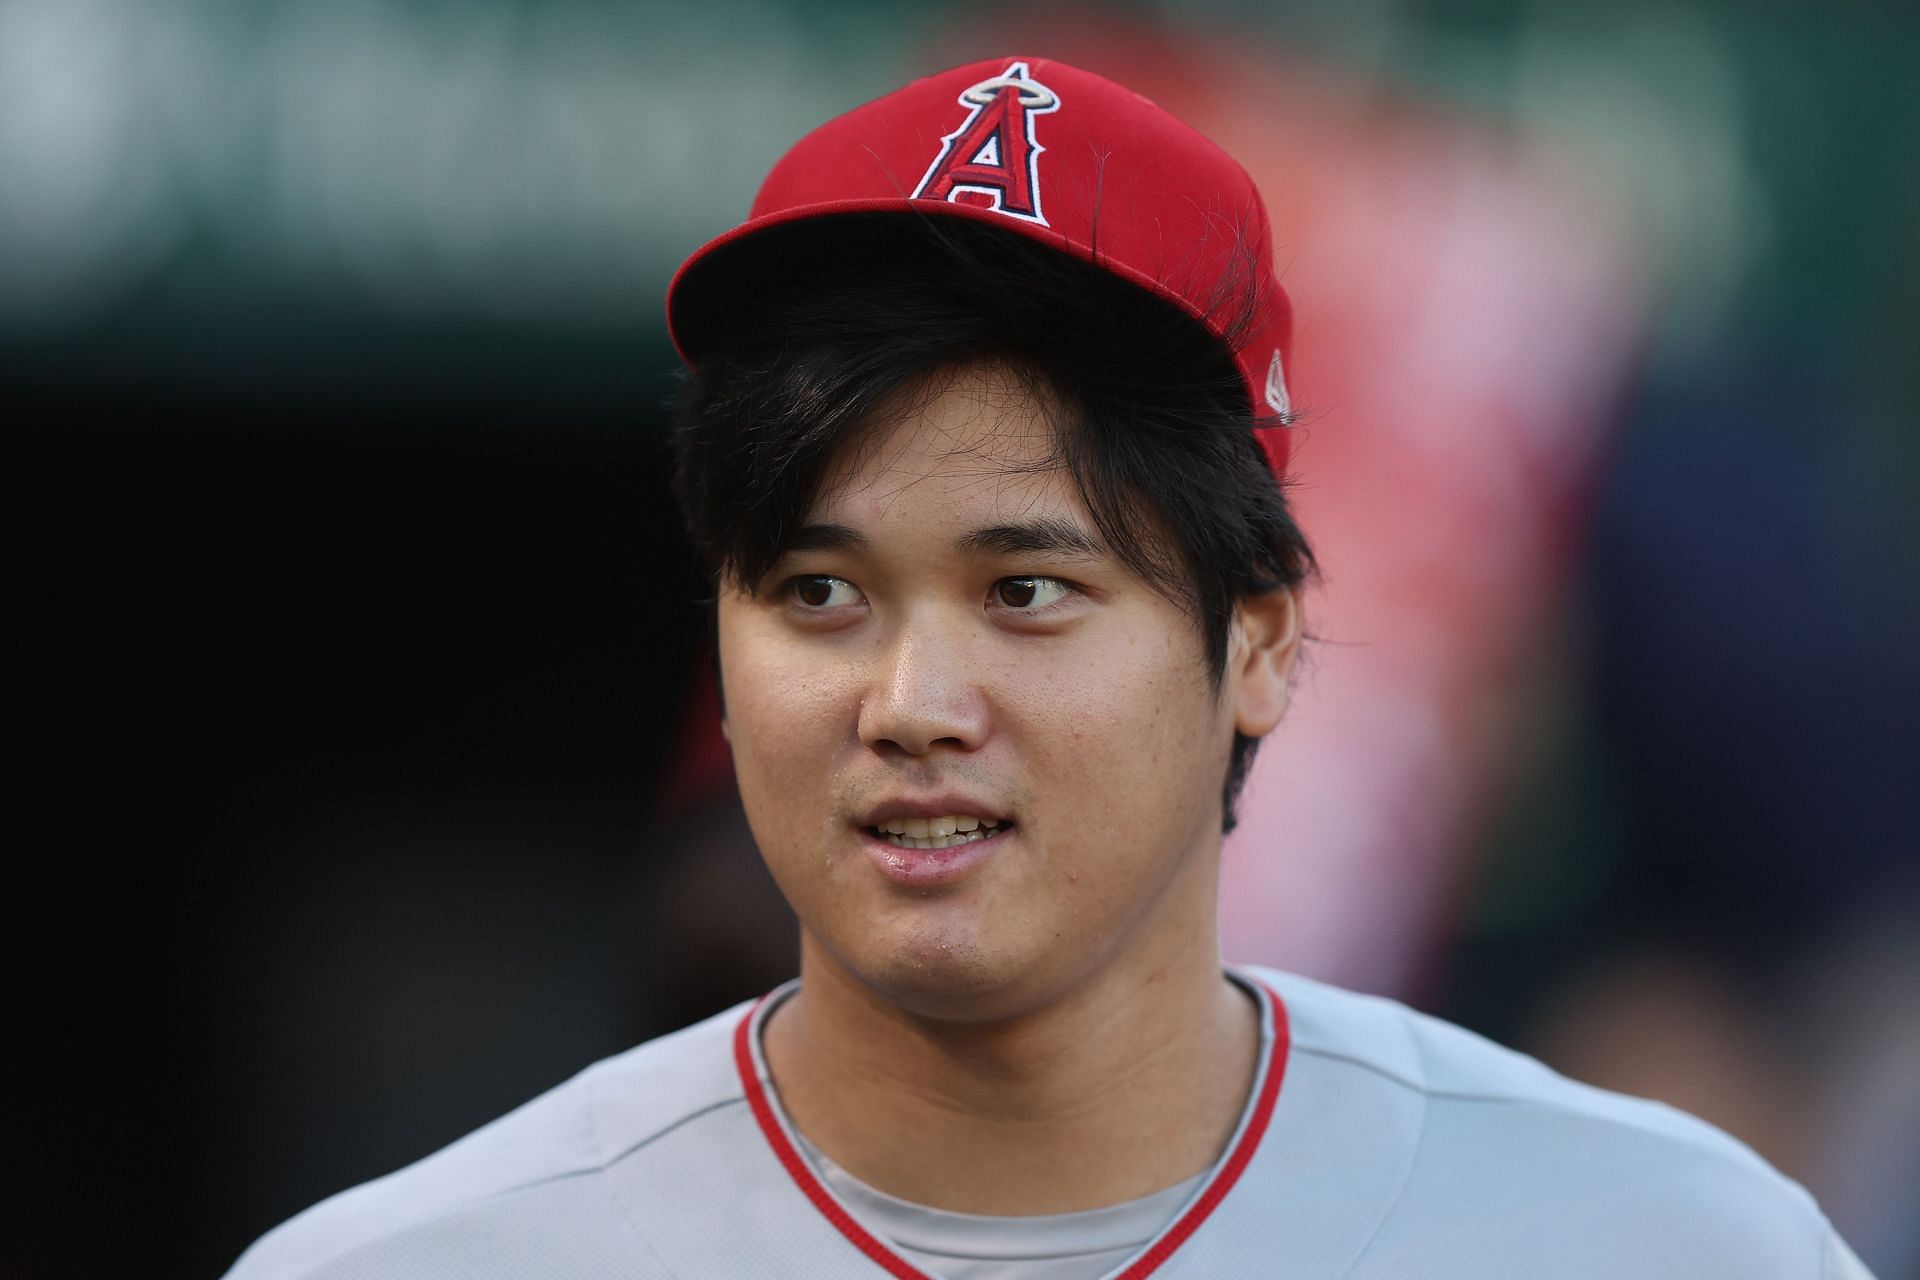 Shohei Ohtani is expected to earn a whopping $65 million throughout 2023